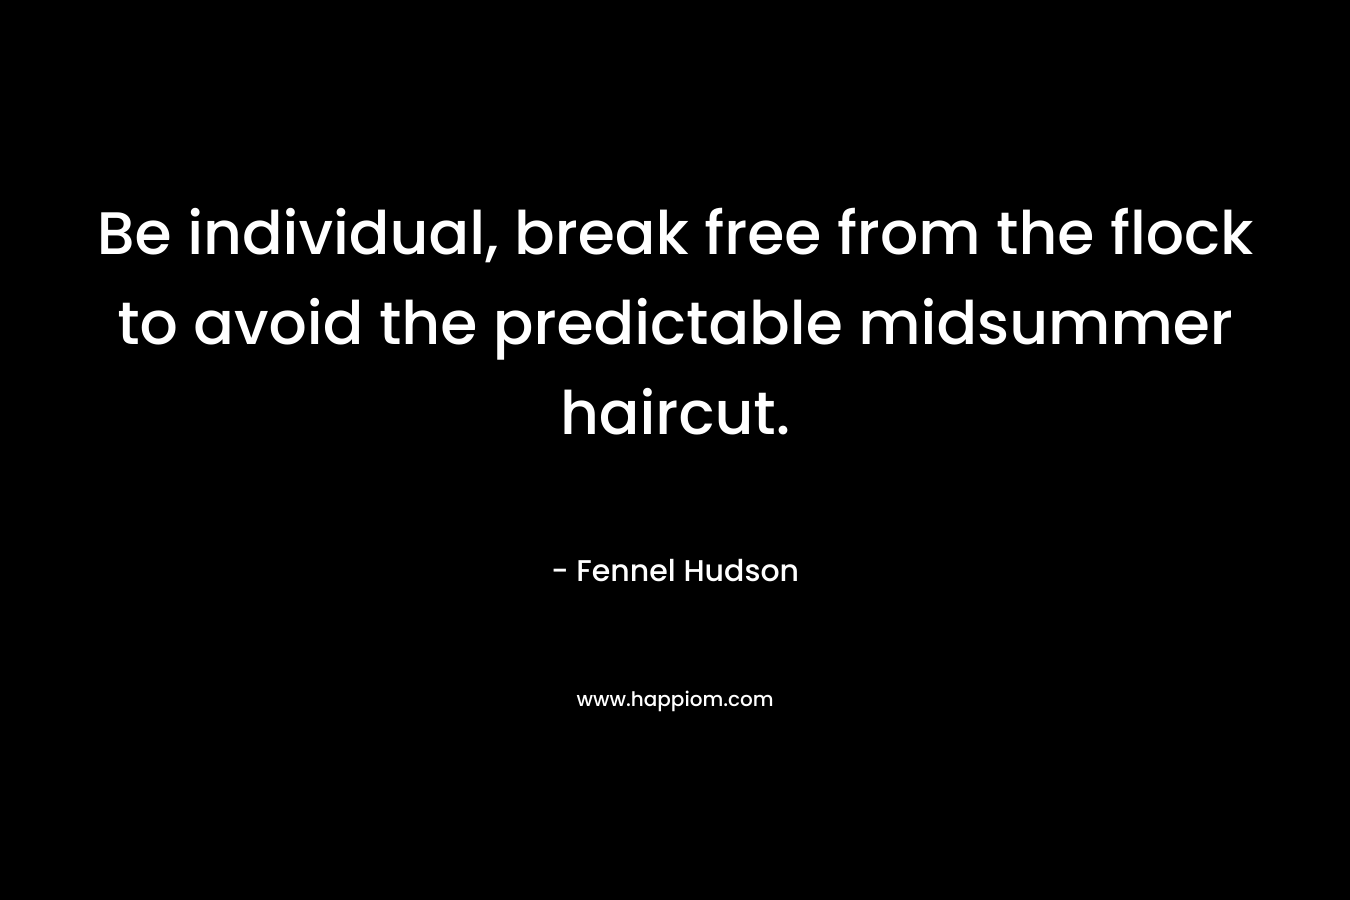 Be individual, break free from the flock to avoid the predictable midsummer haircut. – Fennel Hudson